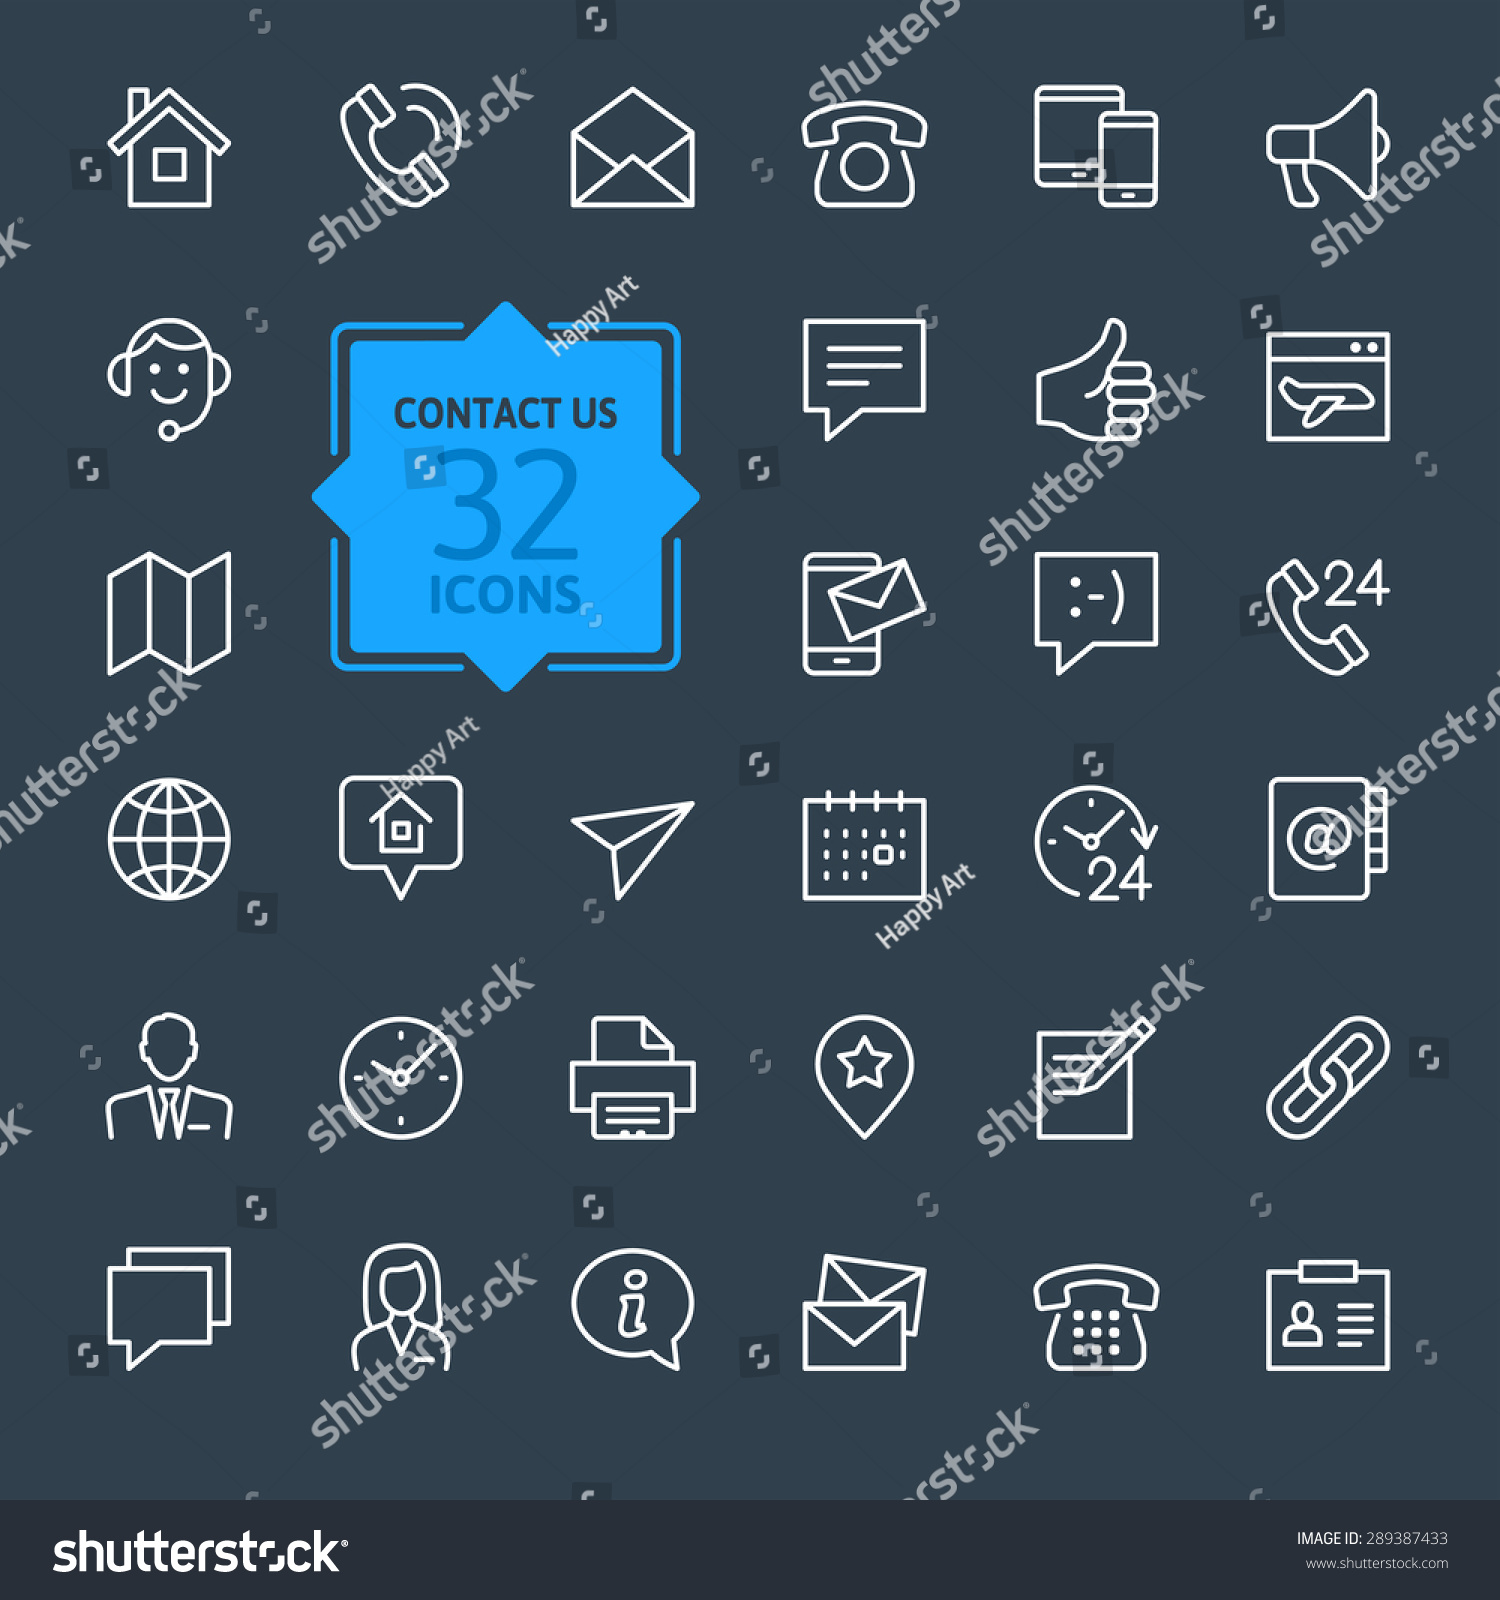 Outline web icons set - Contact us #289387433